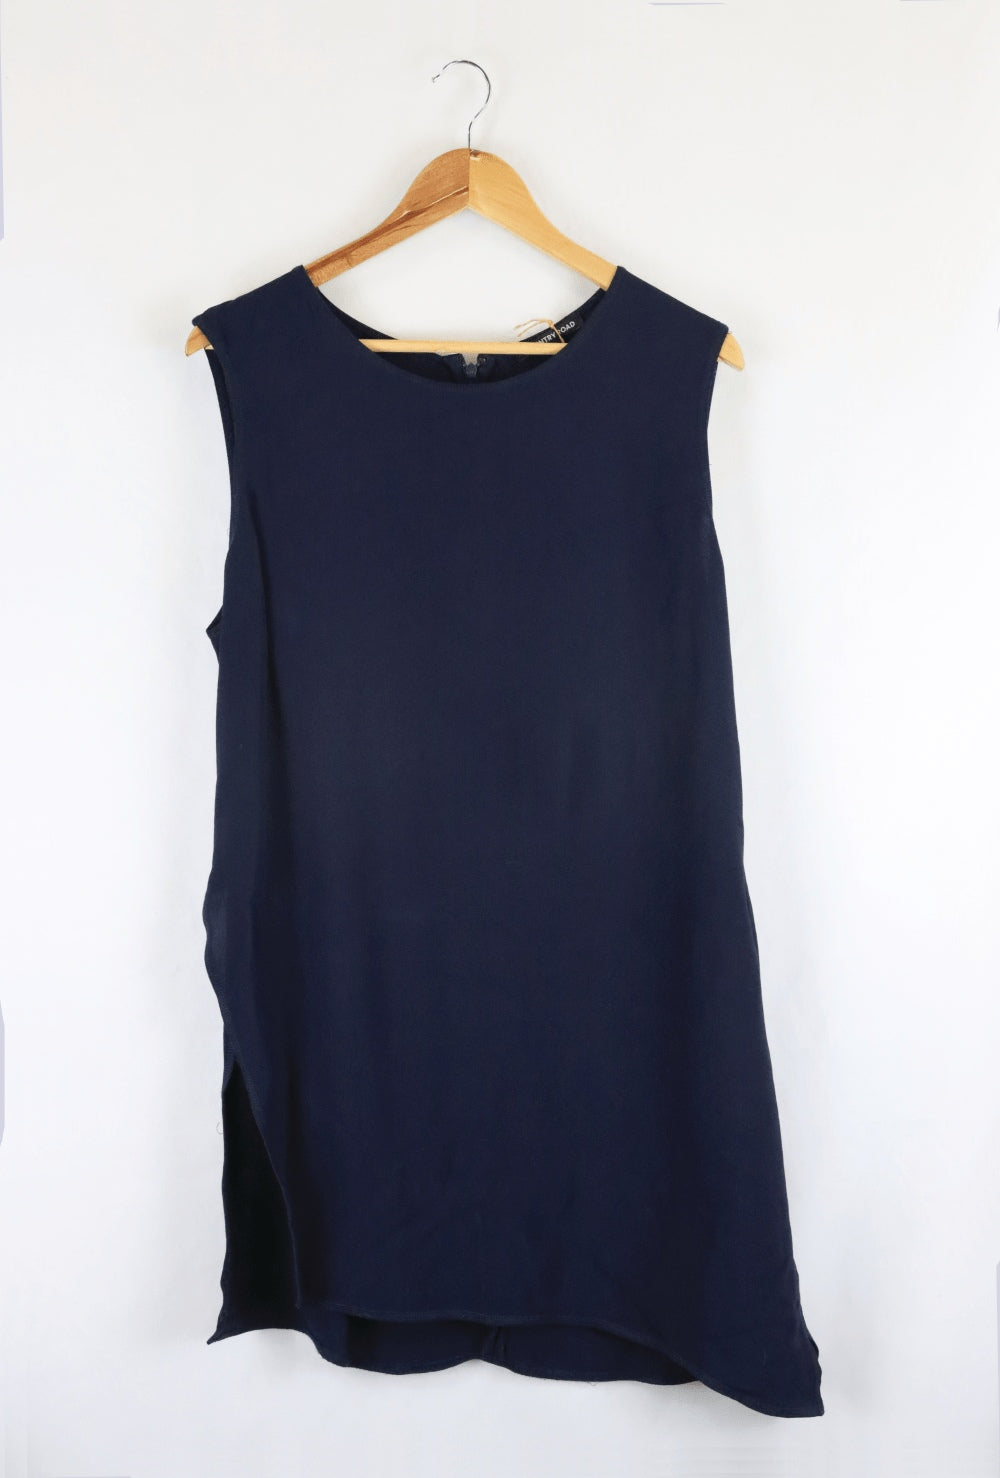 Country Road Navy Singlet XL